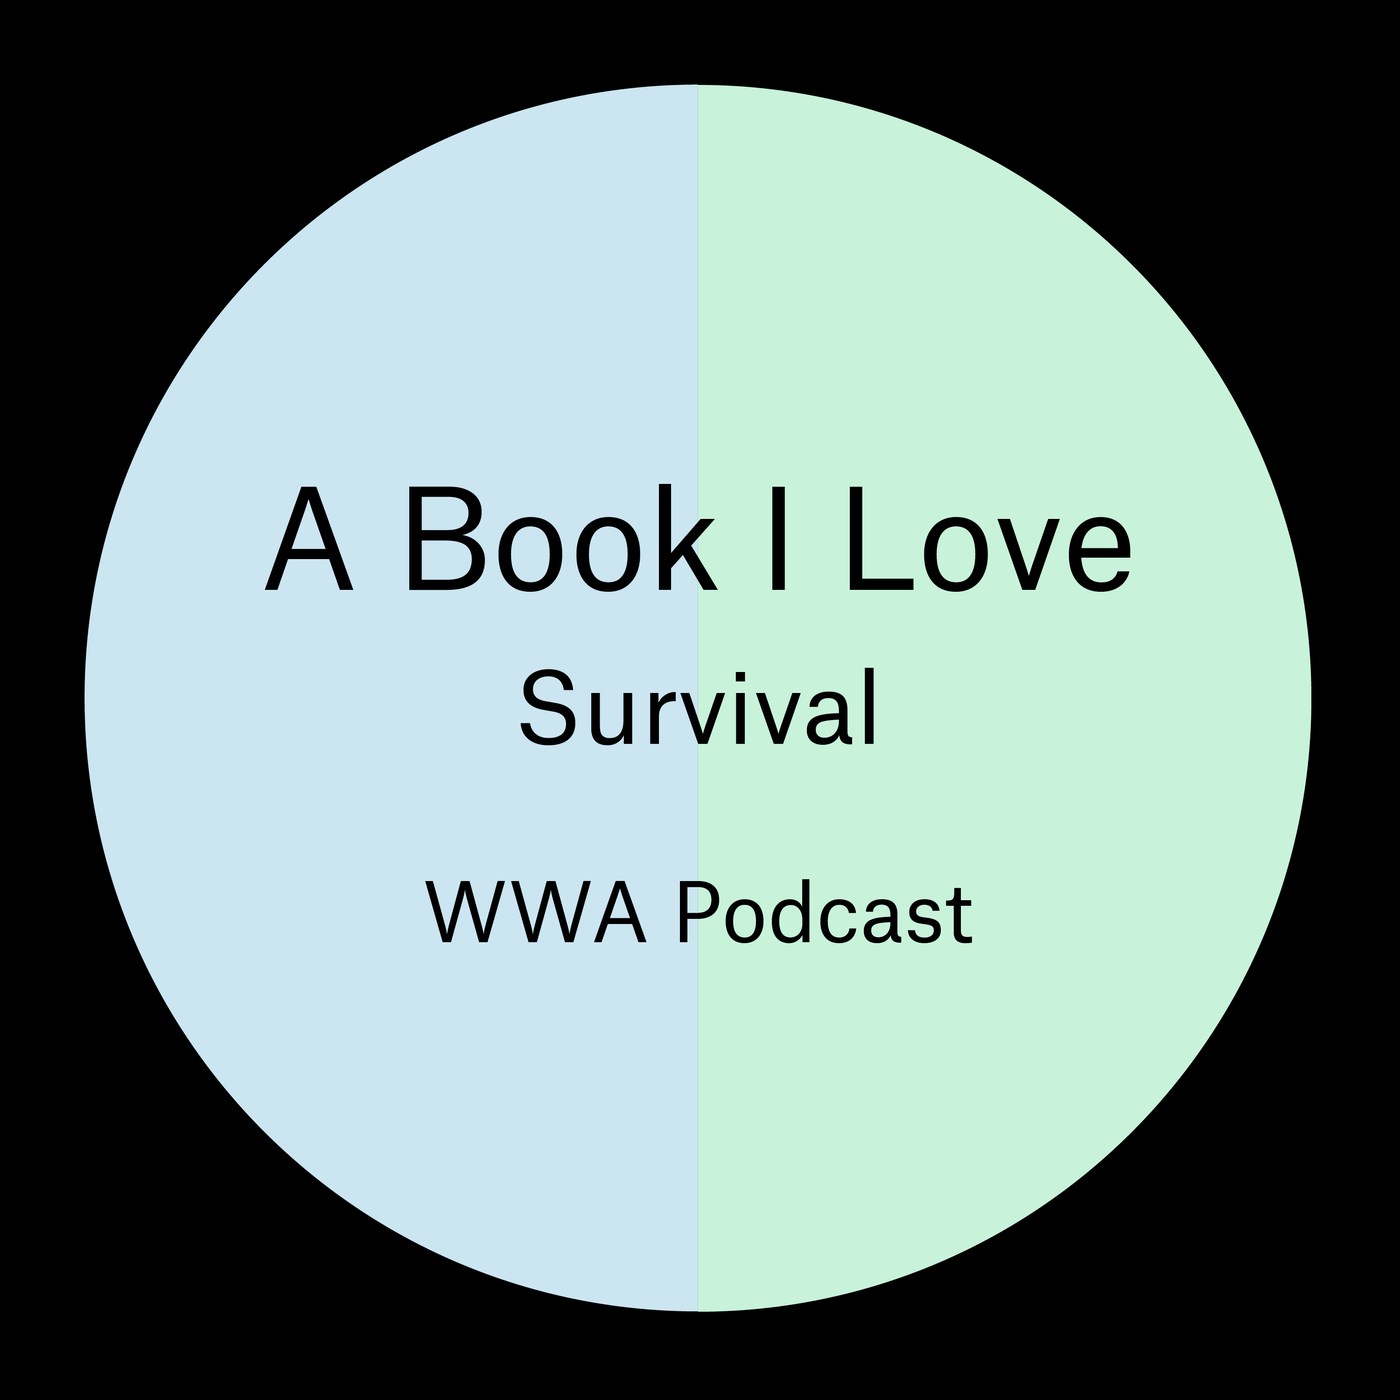 Episode 8: Survival, A Thematic Guide to Canadian Literature by Margaret Atwood, chosen by Mariana Siracusa